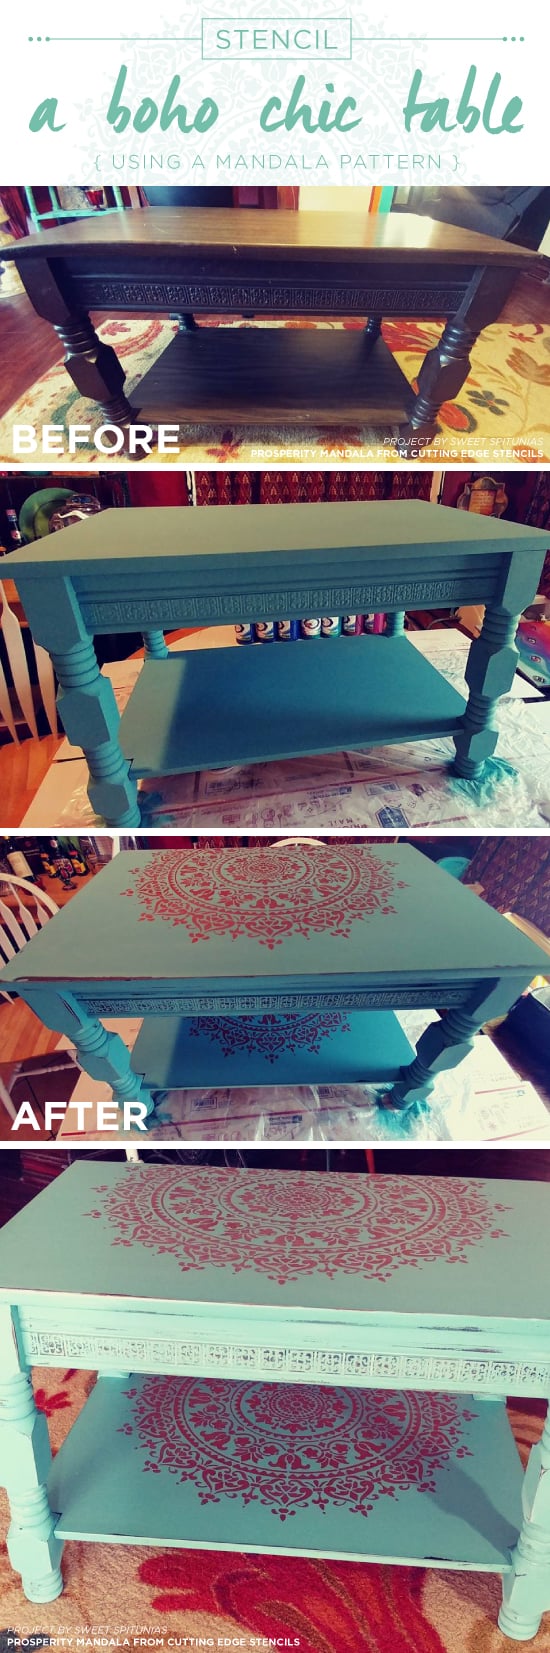 Cutting Edge Stencils shares a teal and metallic copper stenciled and painted coffee table makeover using the Prosperity Mandala Stencil. http://www.cuttingedgestencils.com/prosperity-mandala-stencil-yoga-mandala-stencils-designs.html